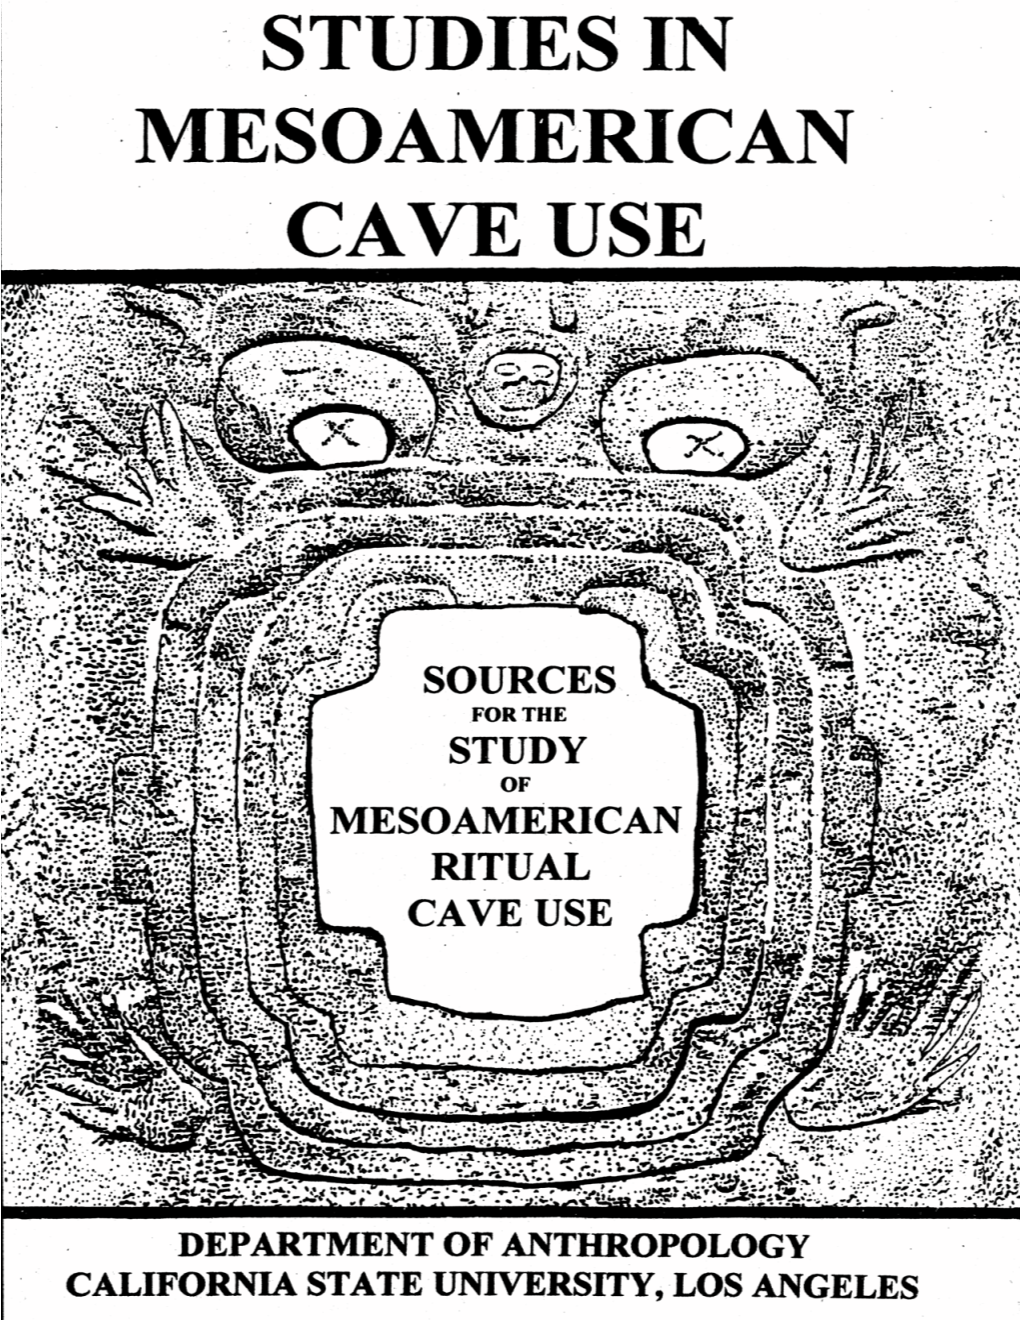 Sources for the Study of Mesoamerican Ritual Cave Use